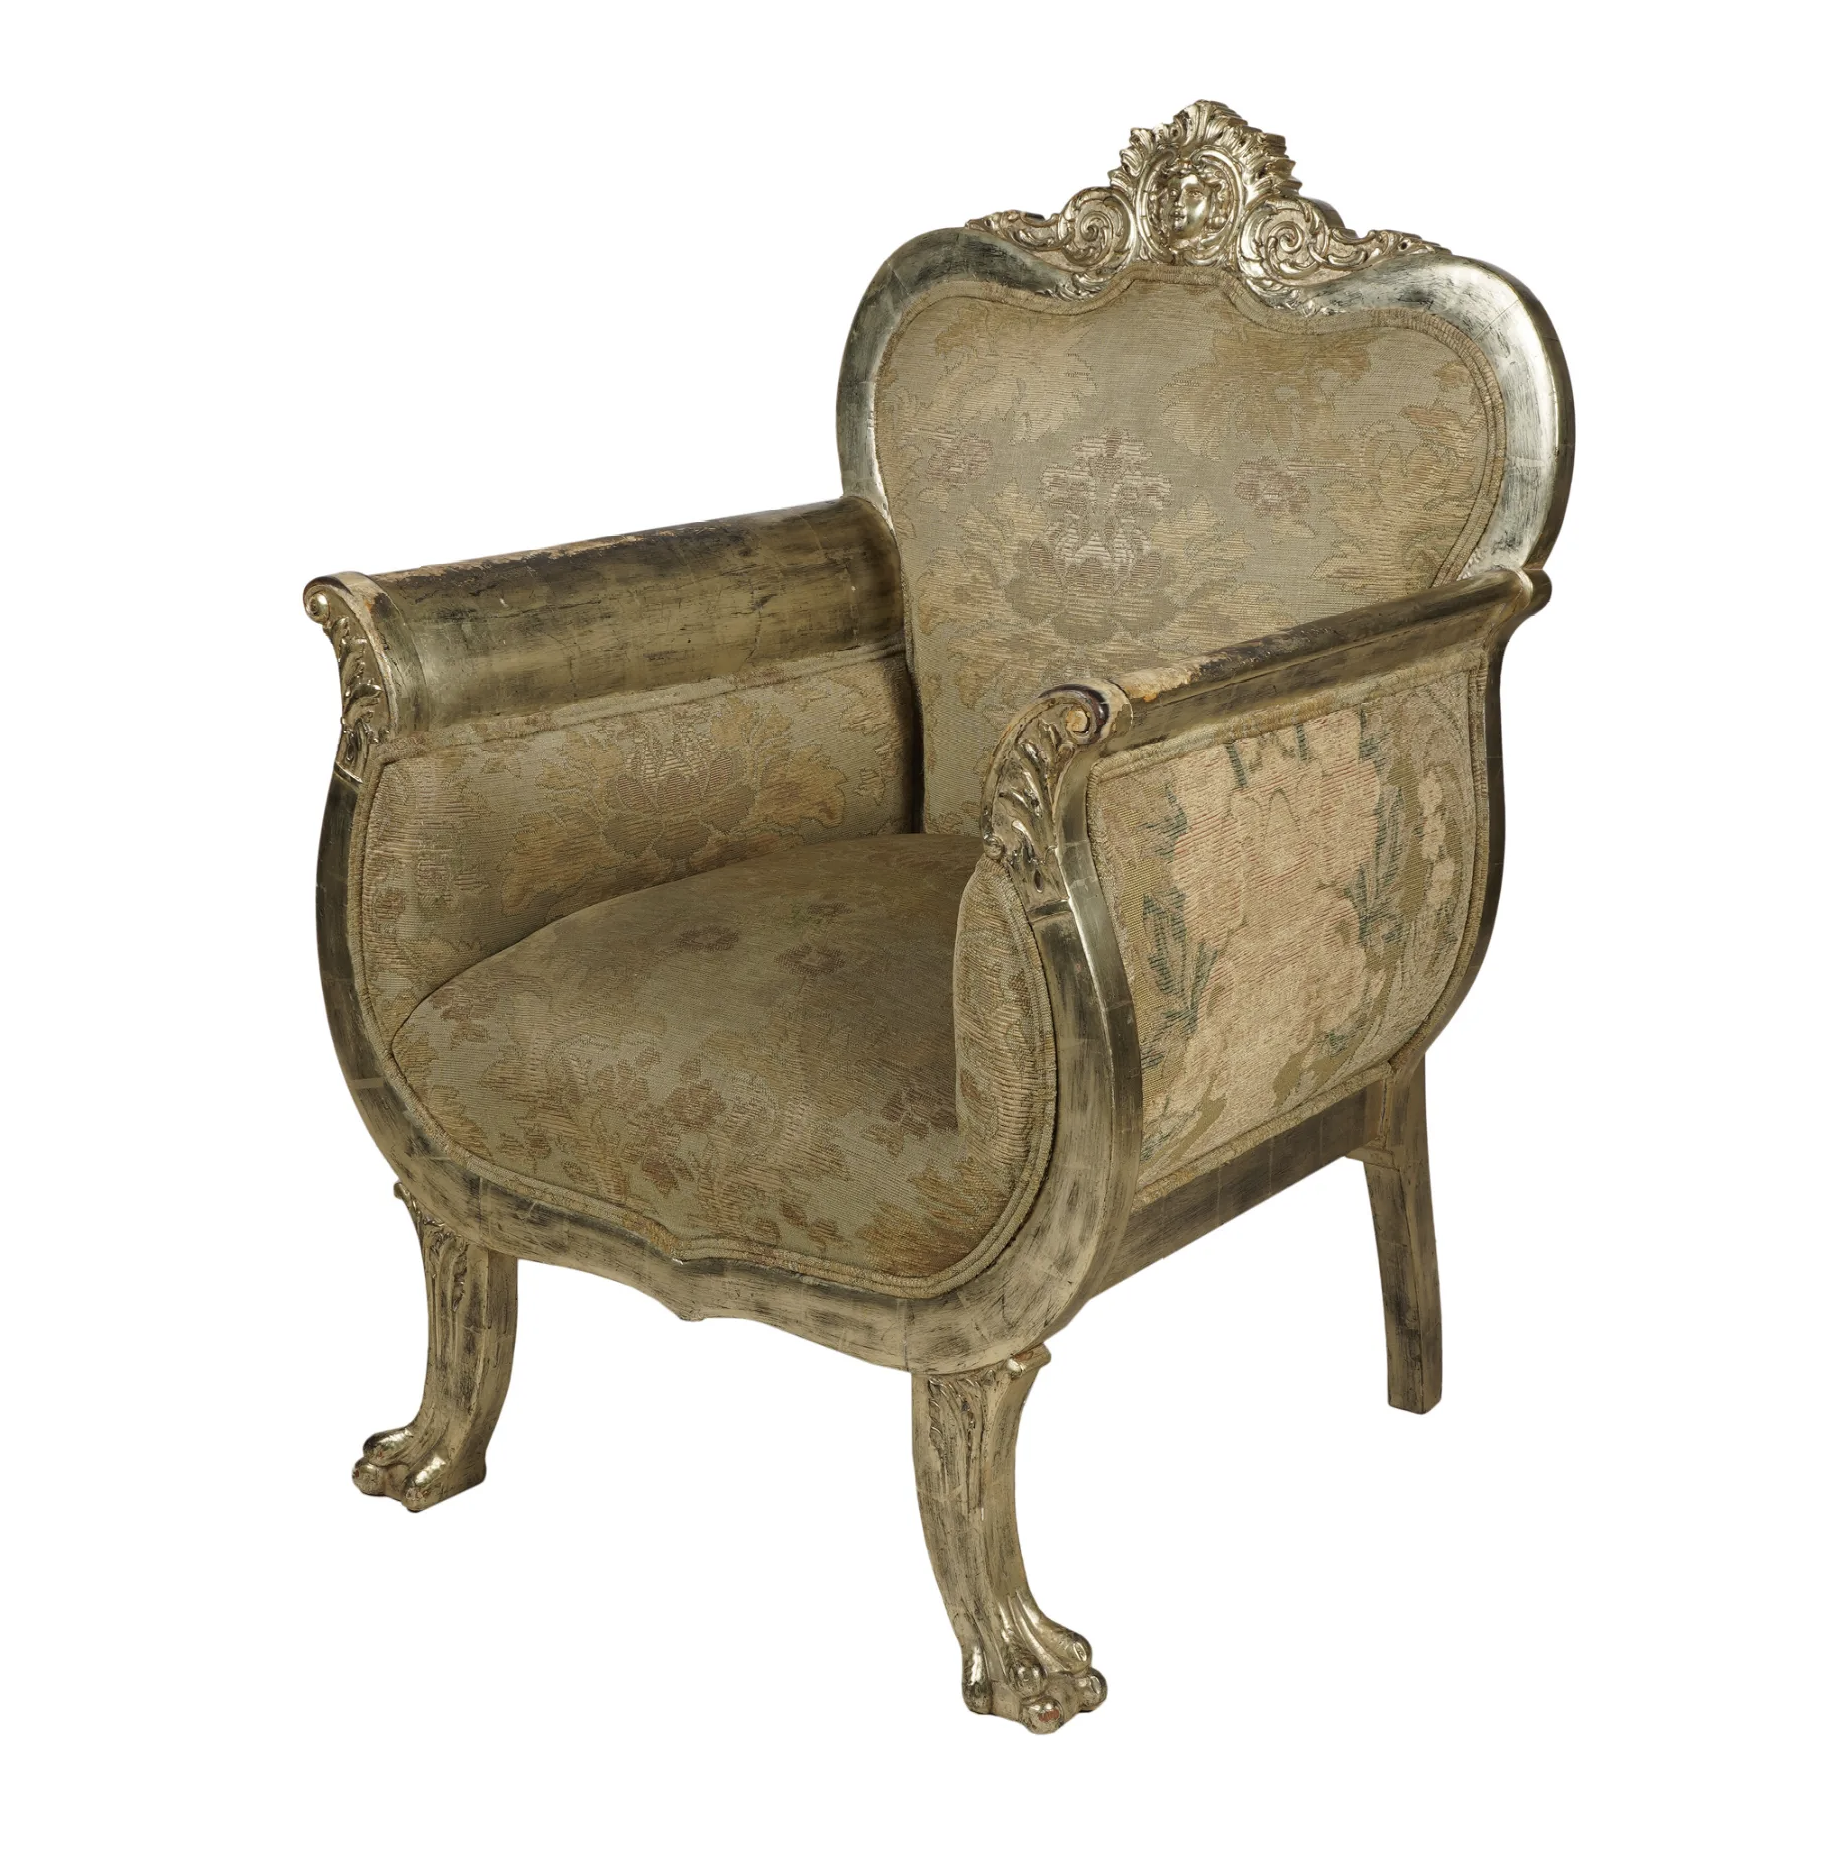 AF2-034: Antique Mid 19th Century French Rococo Revival Upholstered Silver Leaf Carved Arm Chair